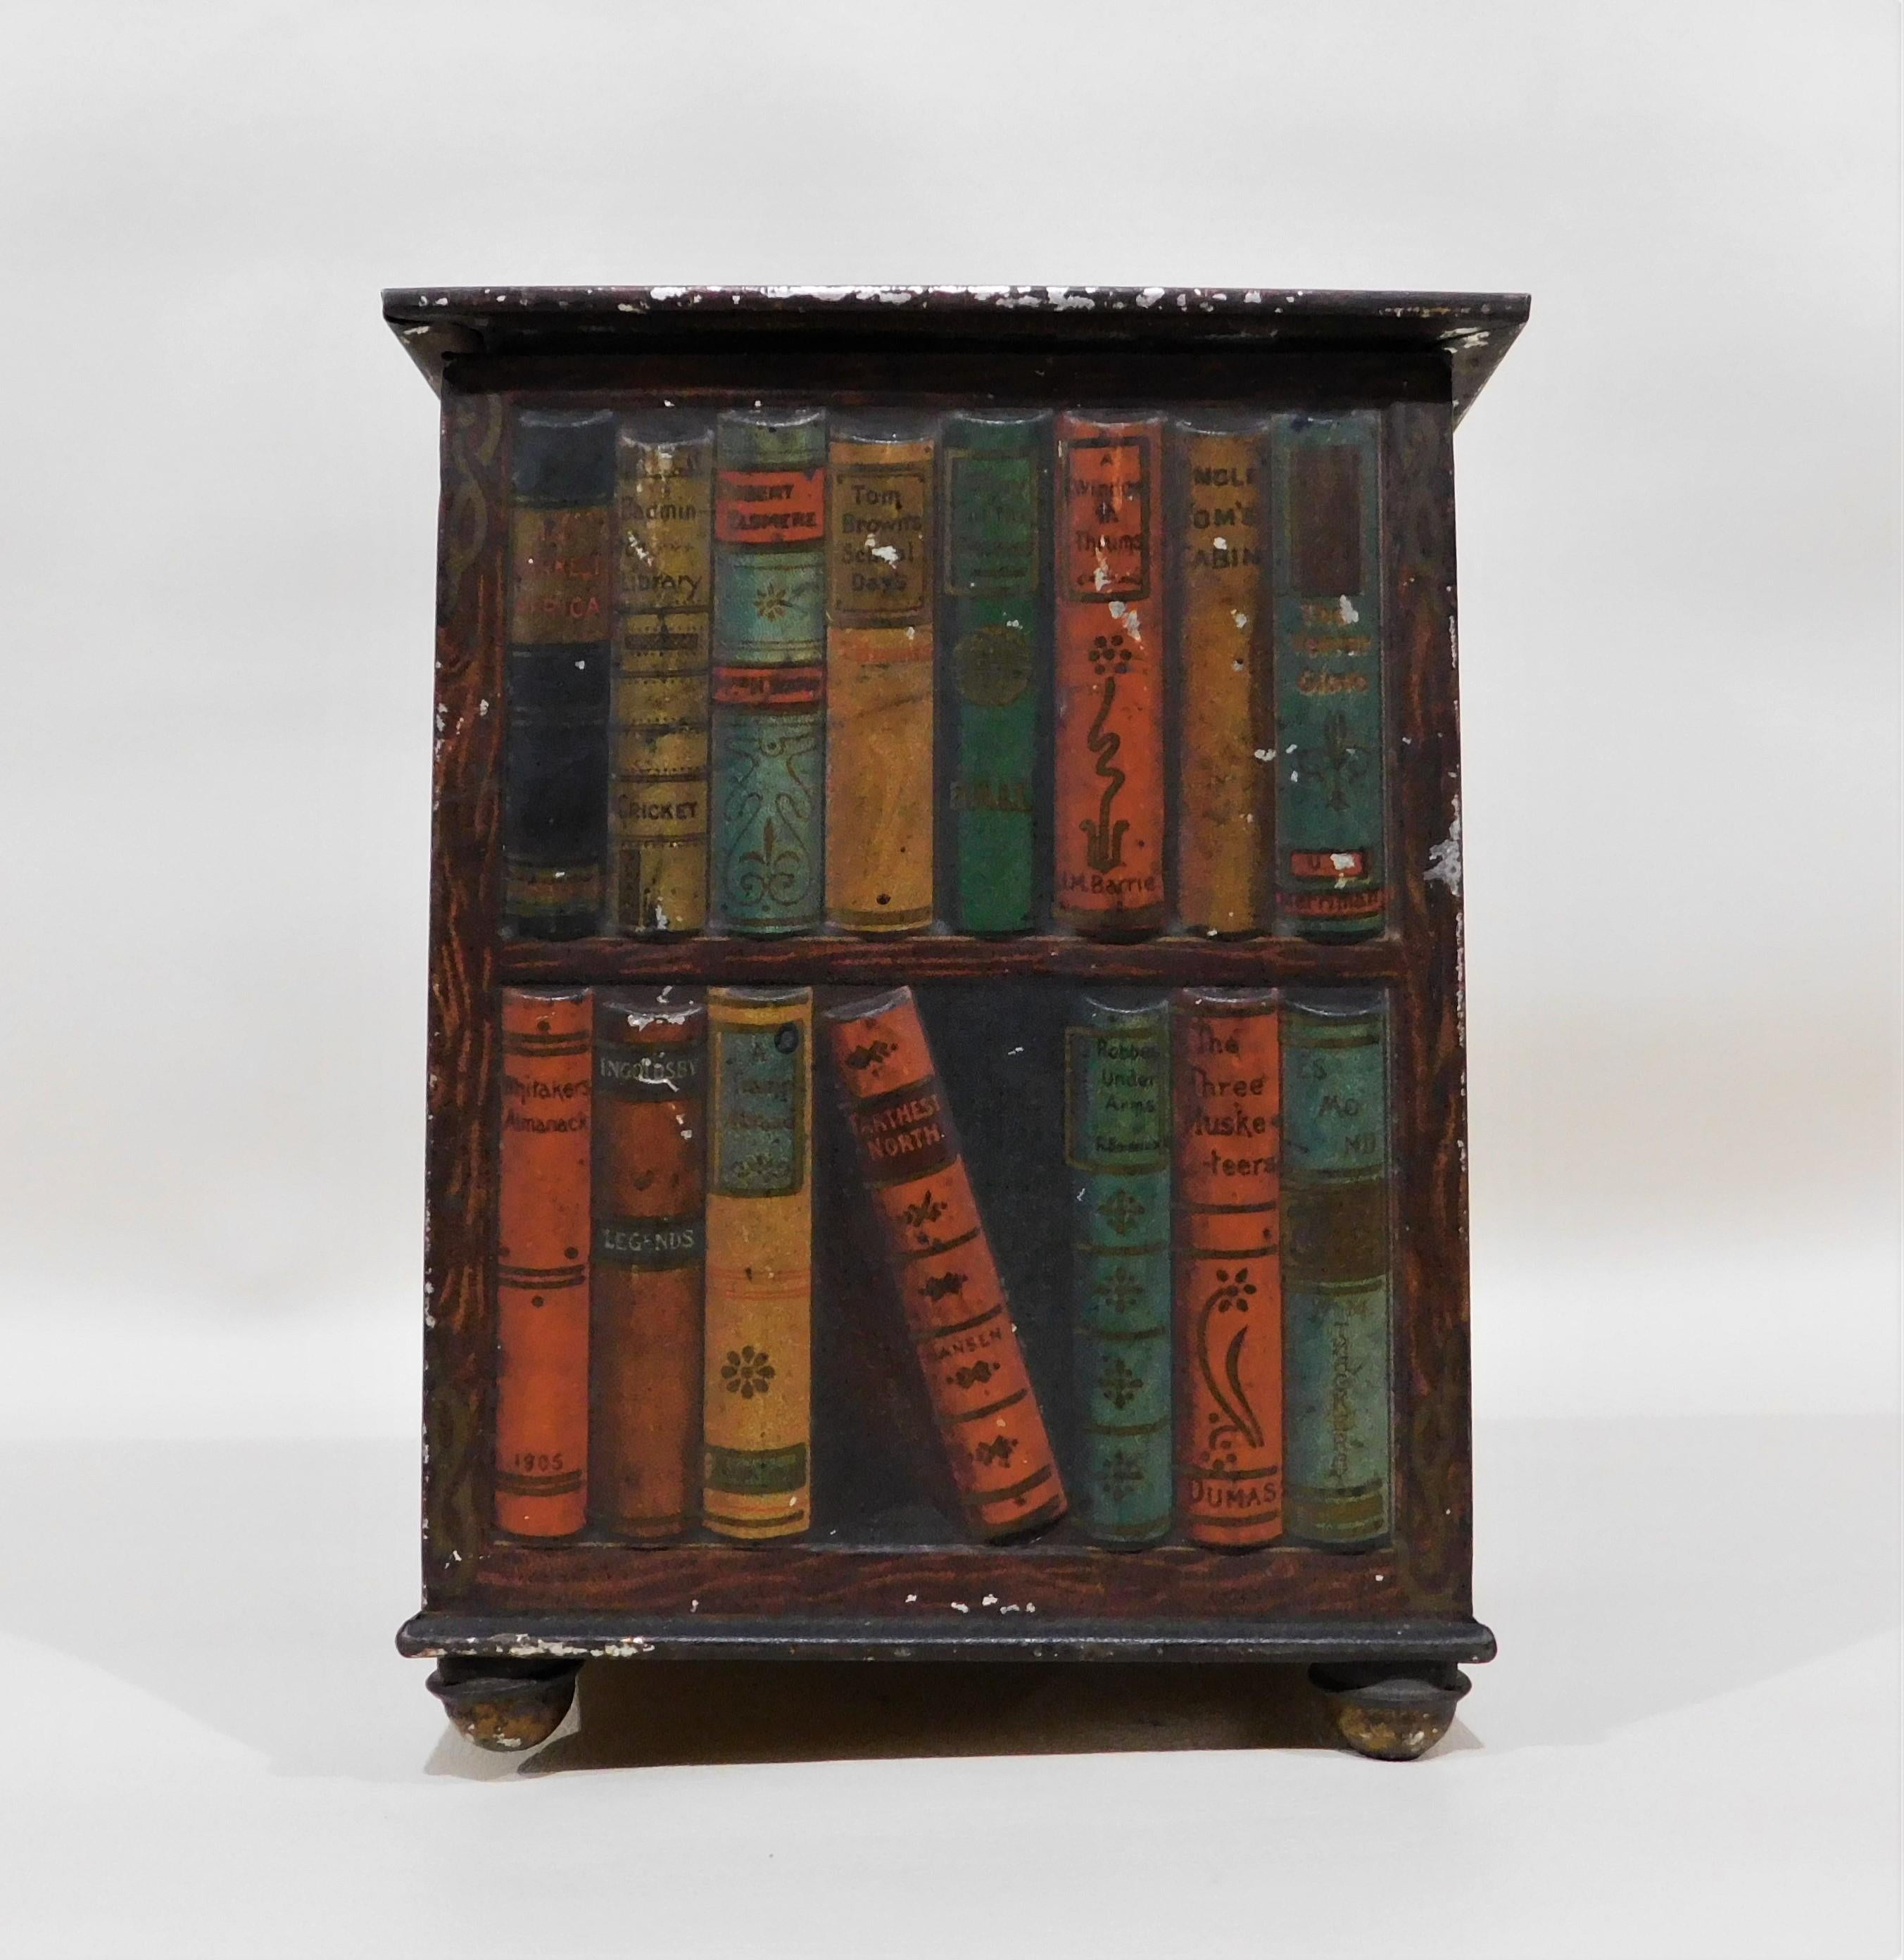 Rare Huntley and Palmers lithographic hand-painted biscuit tin box in the shape of a book stand/case, with books and bindings viewed from all sides, and raised on bun feet. The lid lifts to reveal an engraved marking that reads: 